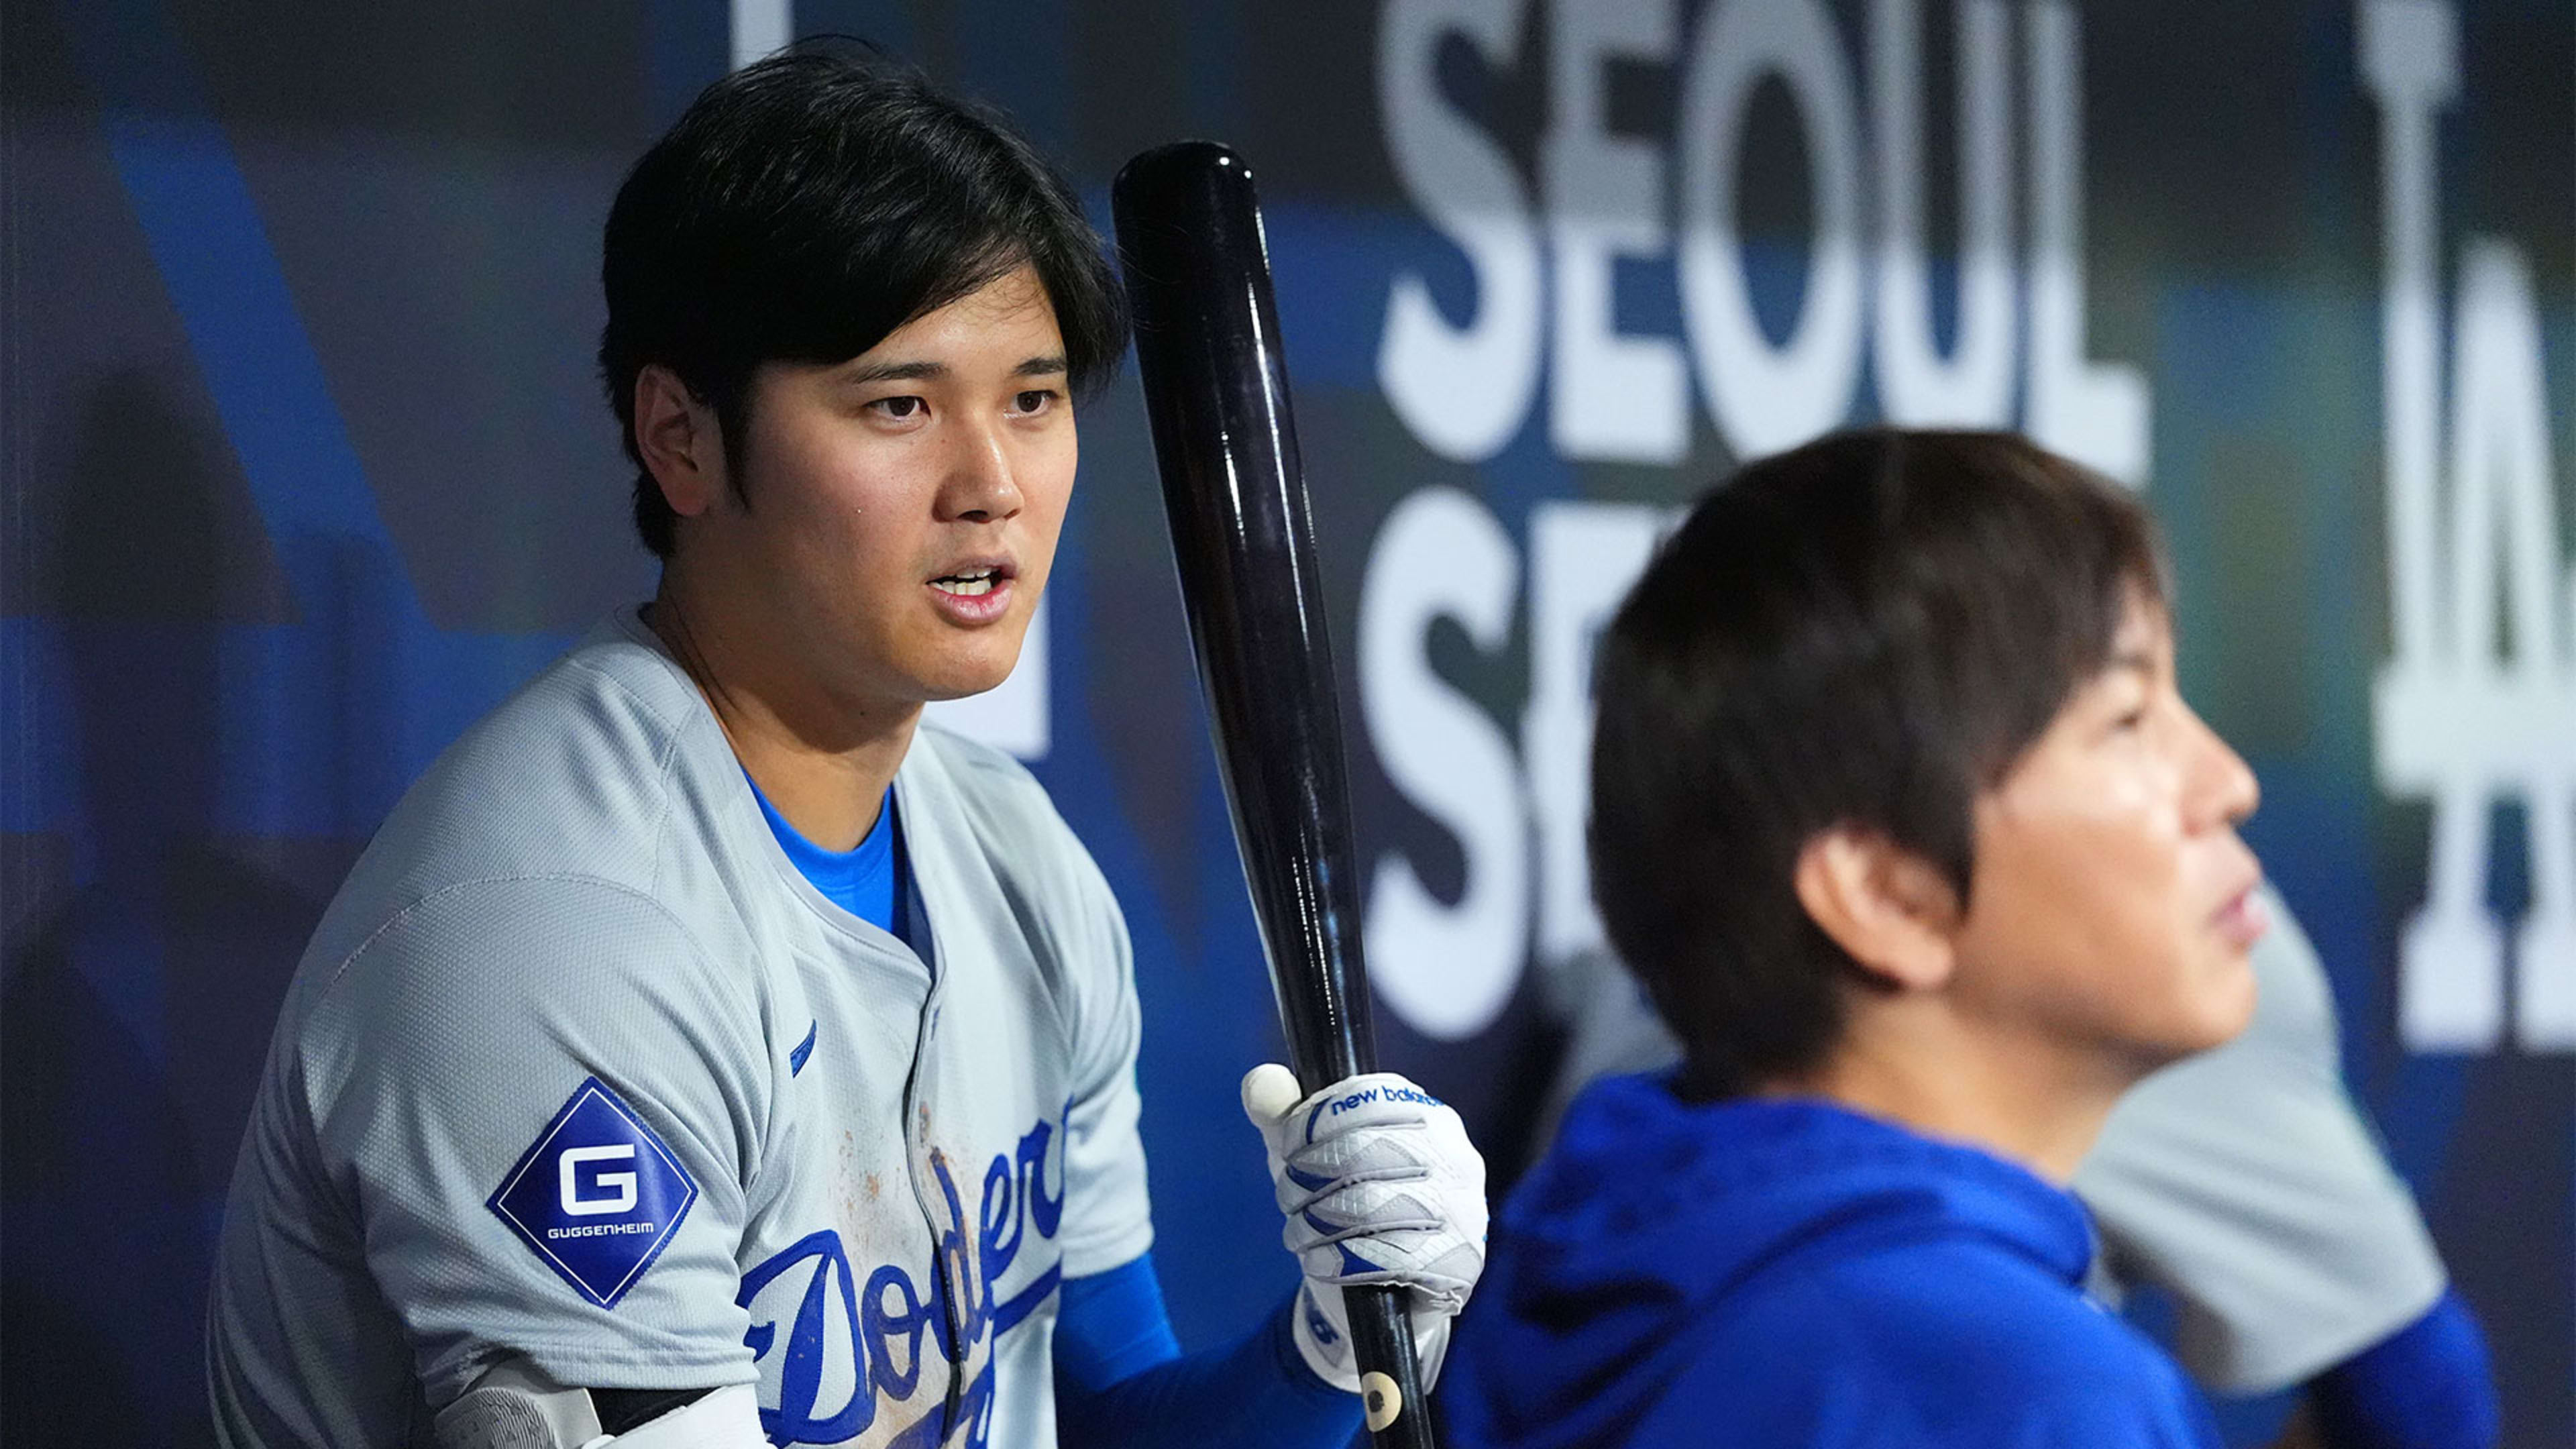 What’s happening with Shohei Ohtani and his interpreter? MLB’s gambling scandal explained